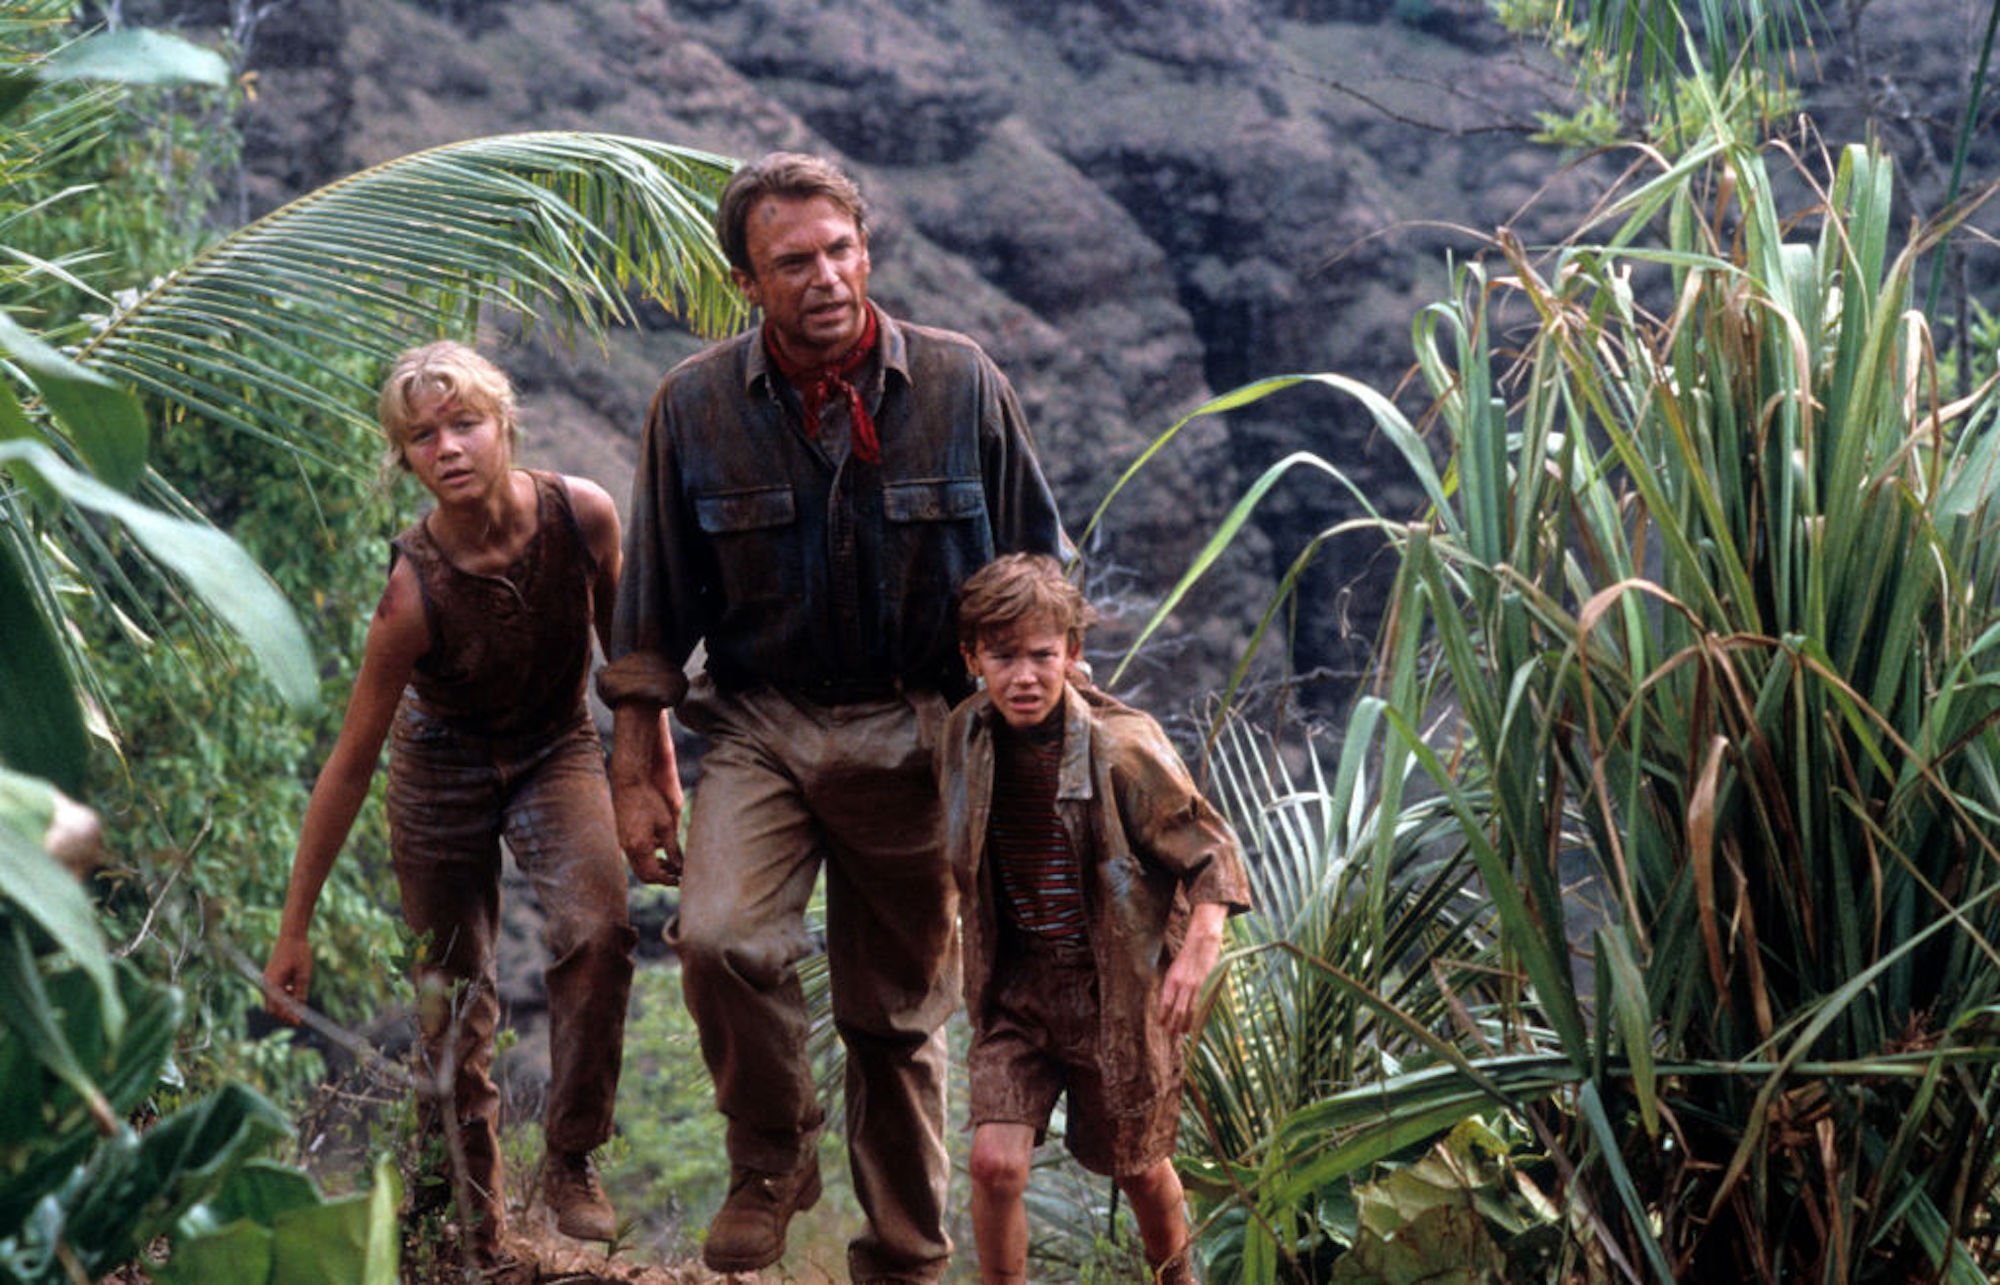 Ariana Richards walks with Sam Neill and Joseph Mazzello in a scene from the film 'Jurassic Park'